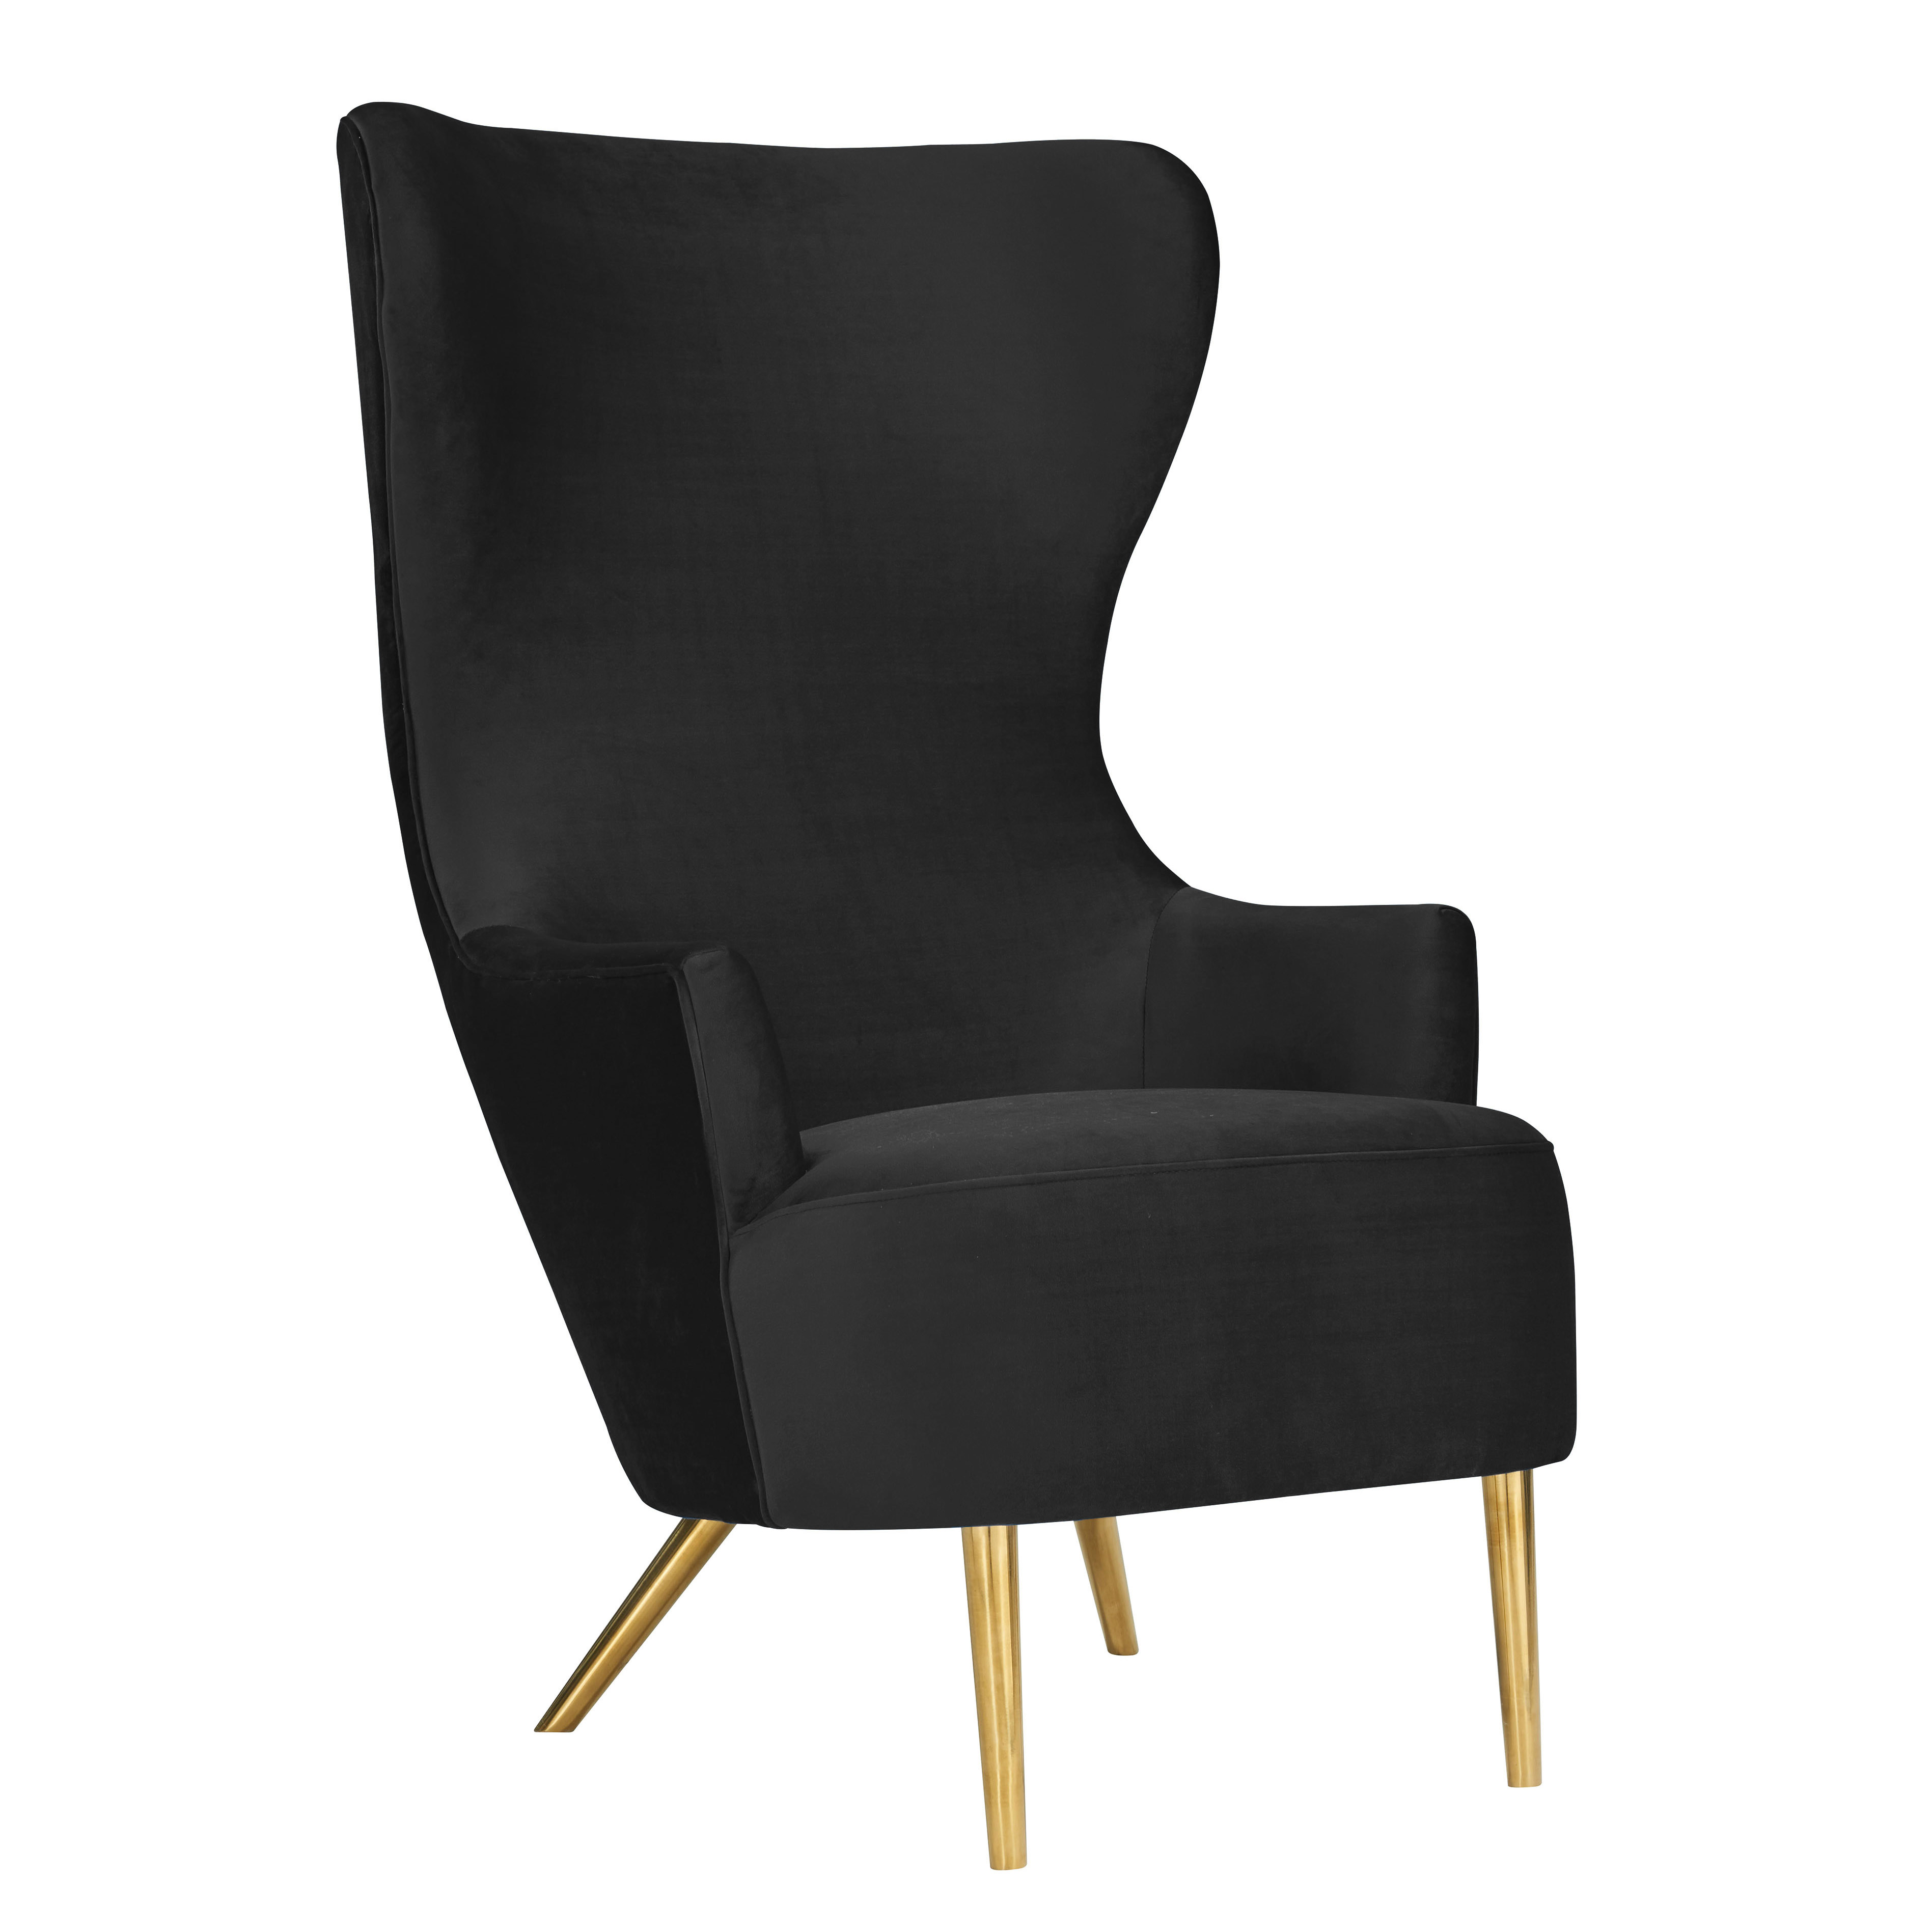 Julia Black Wingback Chair by Inspire Me! Home Decor - TOV-IHS44150